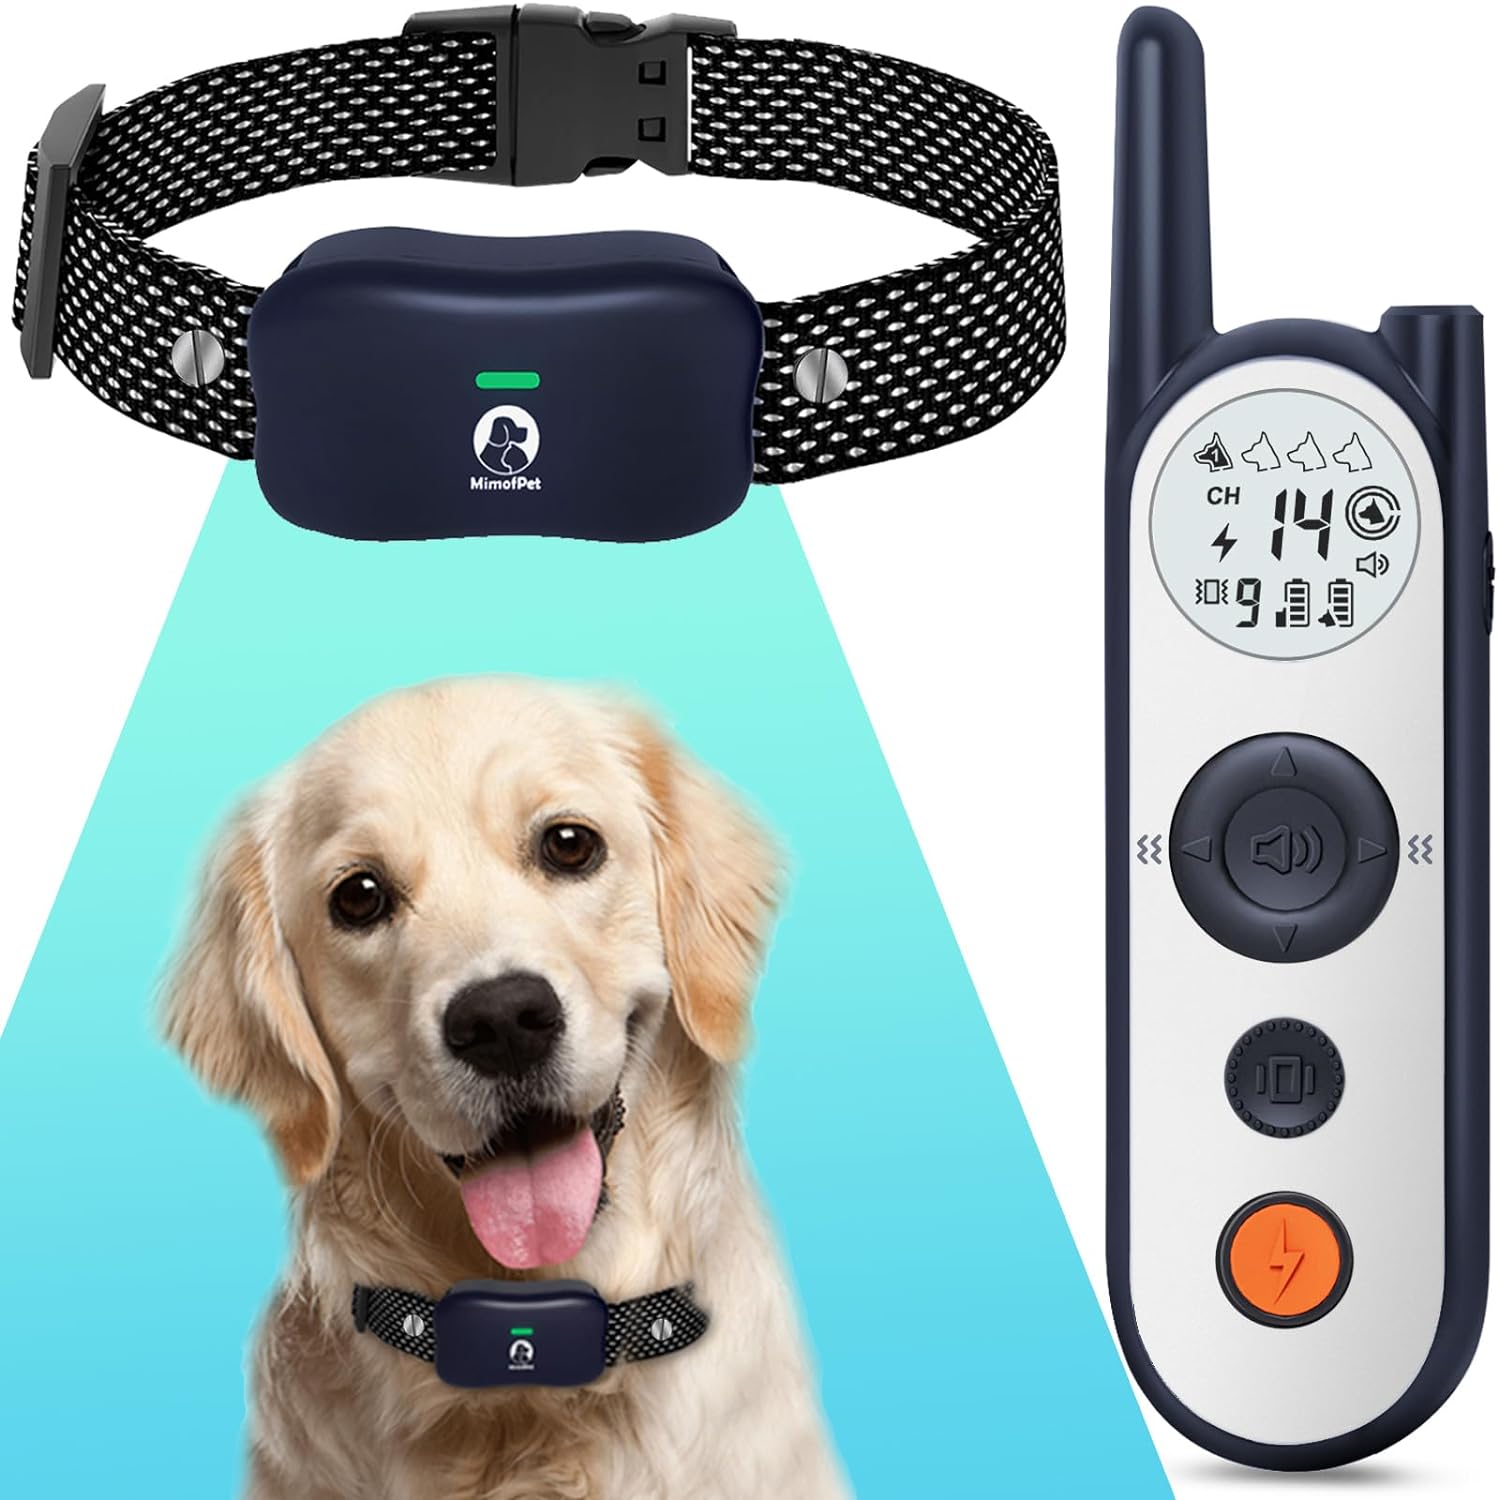 Wireless Dog Fence System - Covers up to 856-Acre Wireless Dog Collar Fence System,5900FT Shock Collar with Remote,Rechargeable Electric Dog Fence with 3 Training Modes for Large Medium Dogs